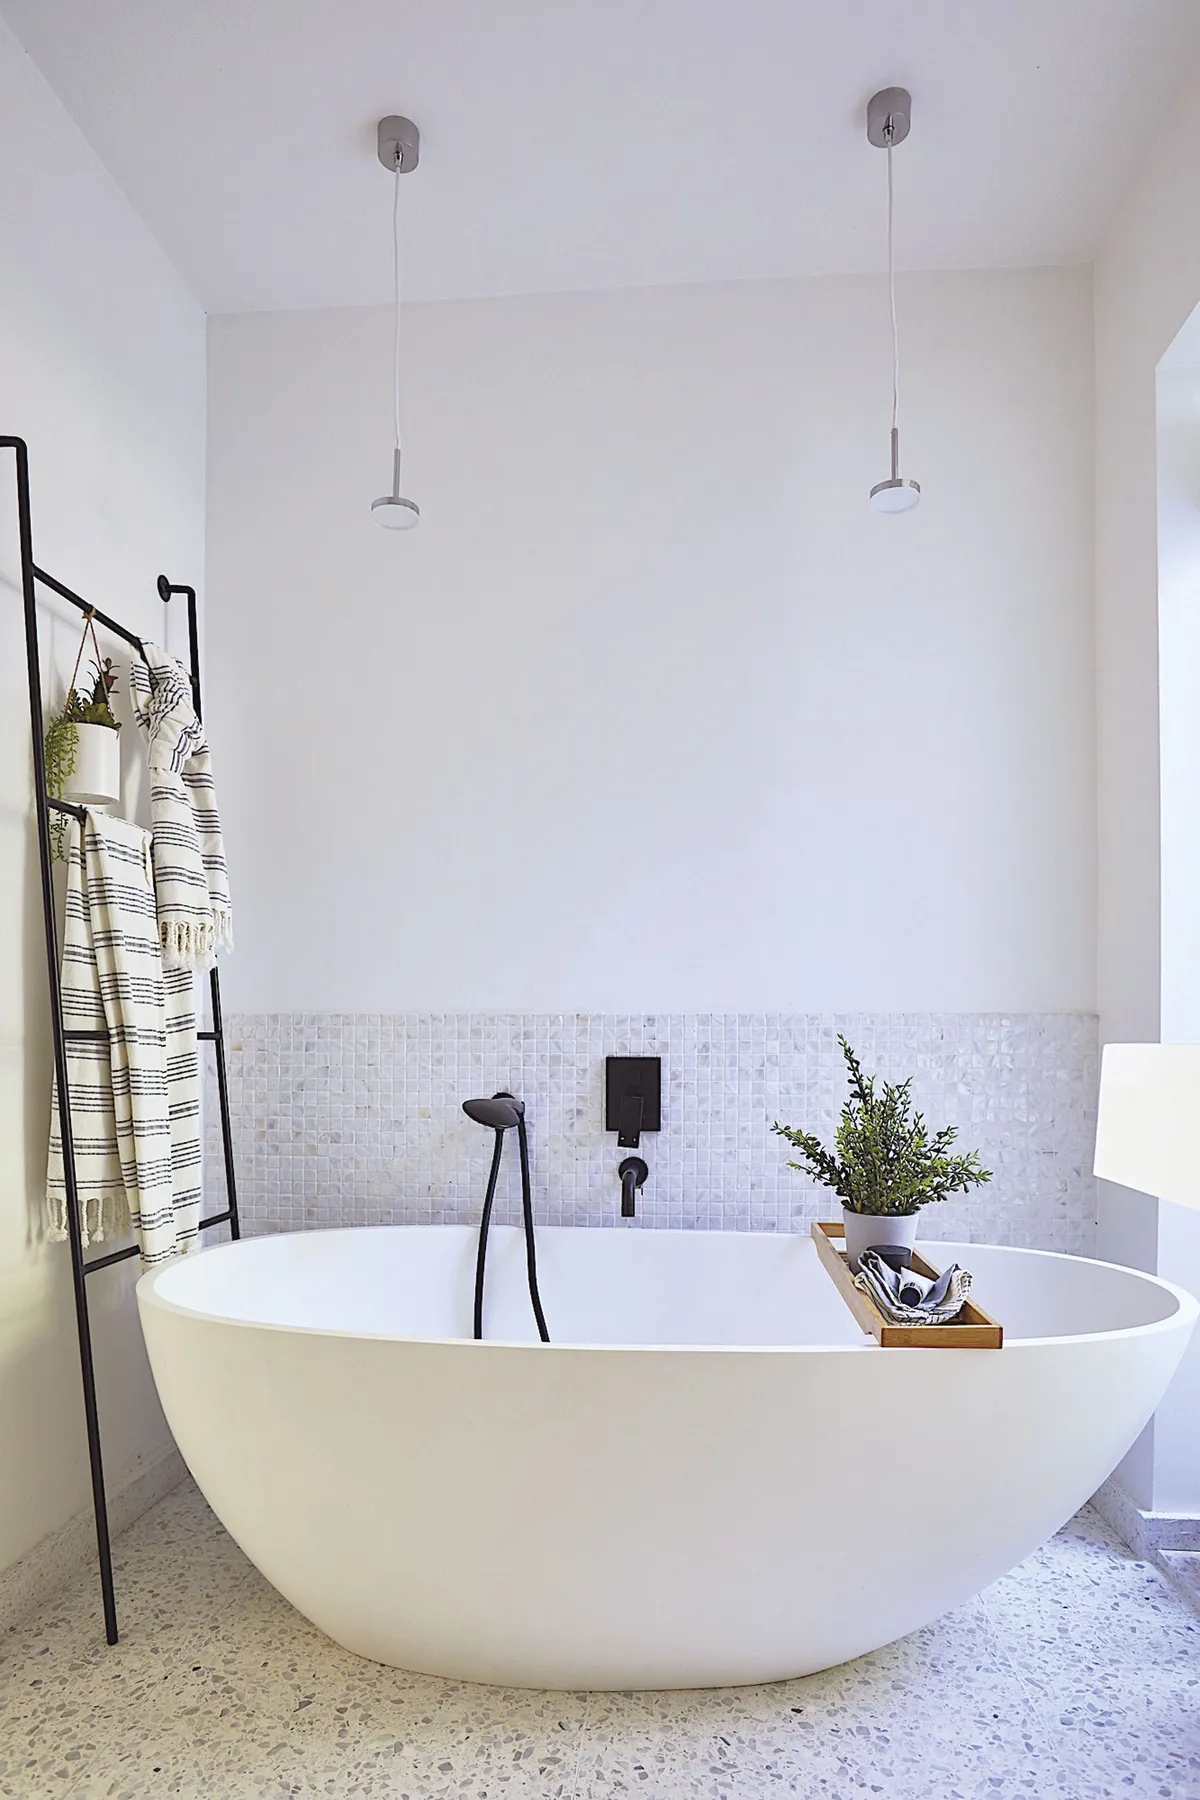 For a clean, modern look Shrez went for an all-white scheme with elements of matt black, tying features such as the black mixer taps over the free-standing bath with the ladder towel rail